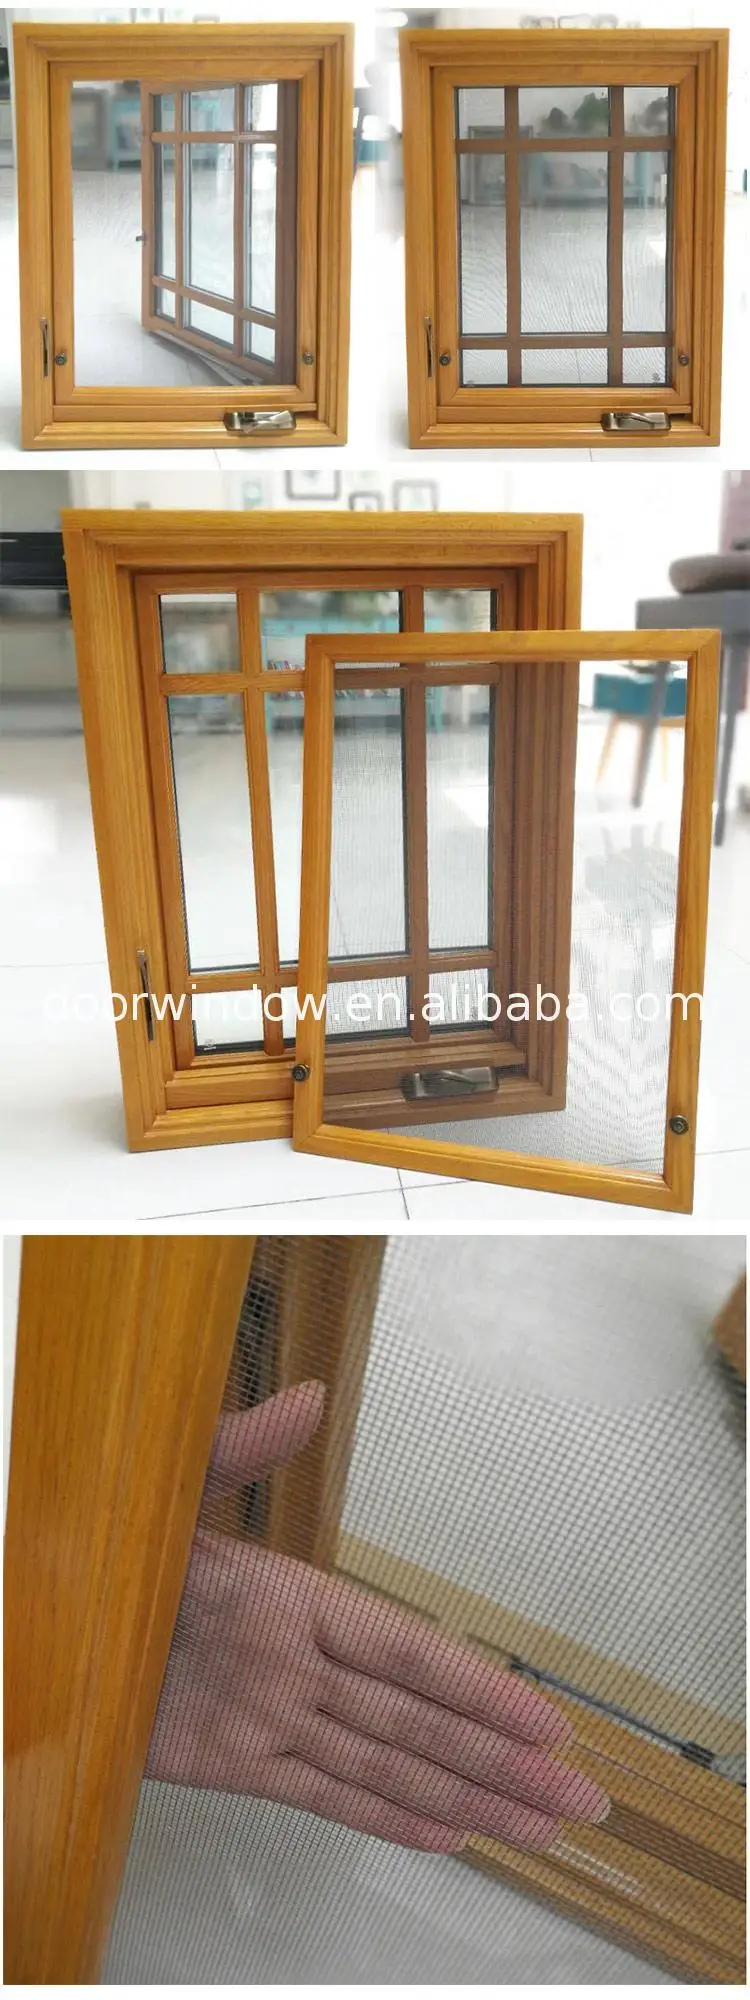 Hot sale factory direct ready made wooden window frames quality windows modern house grills